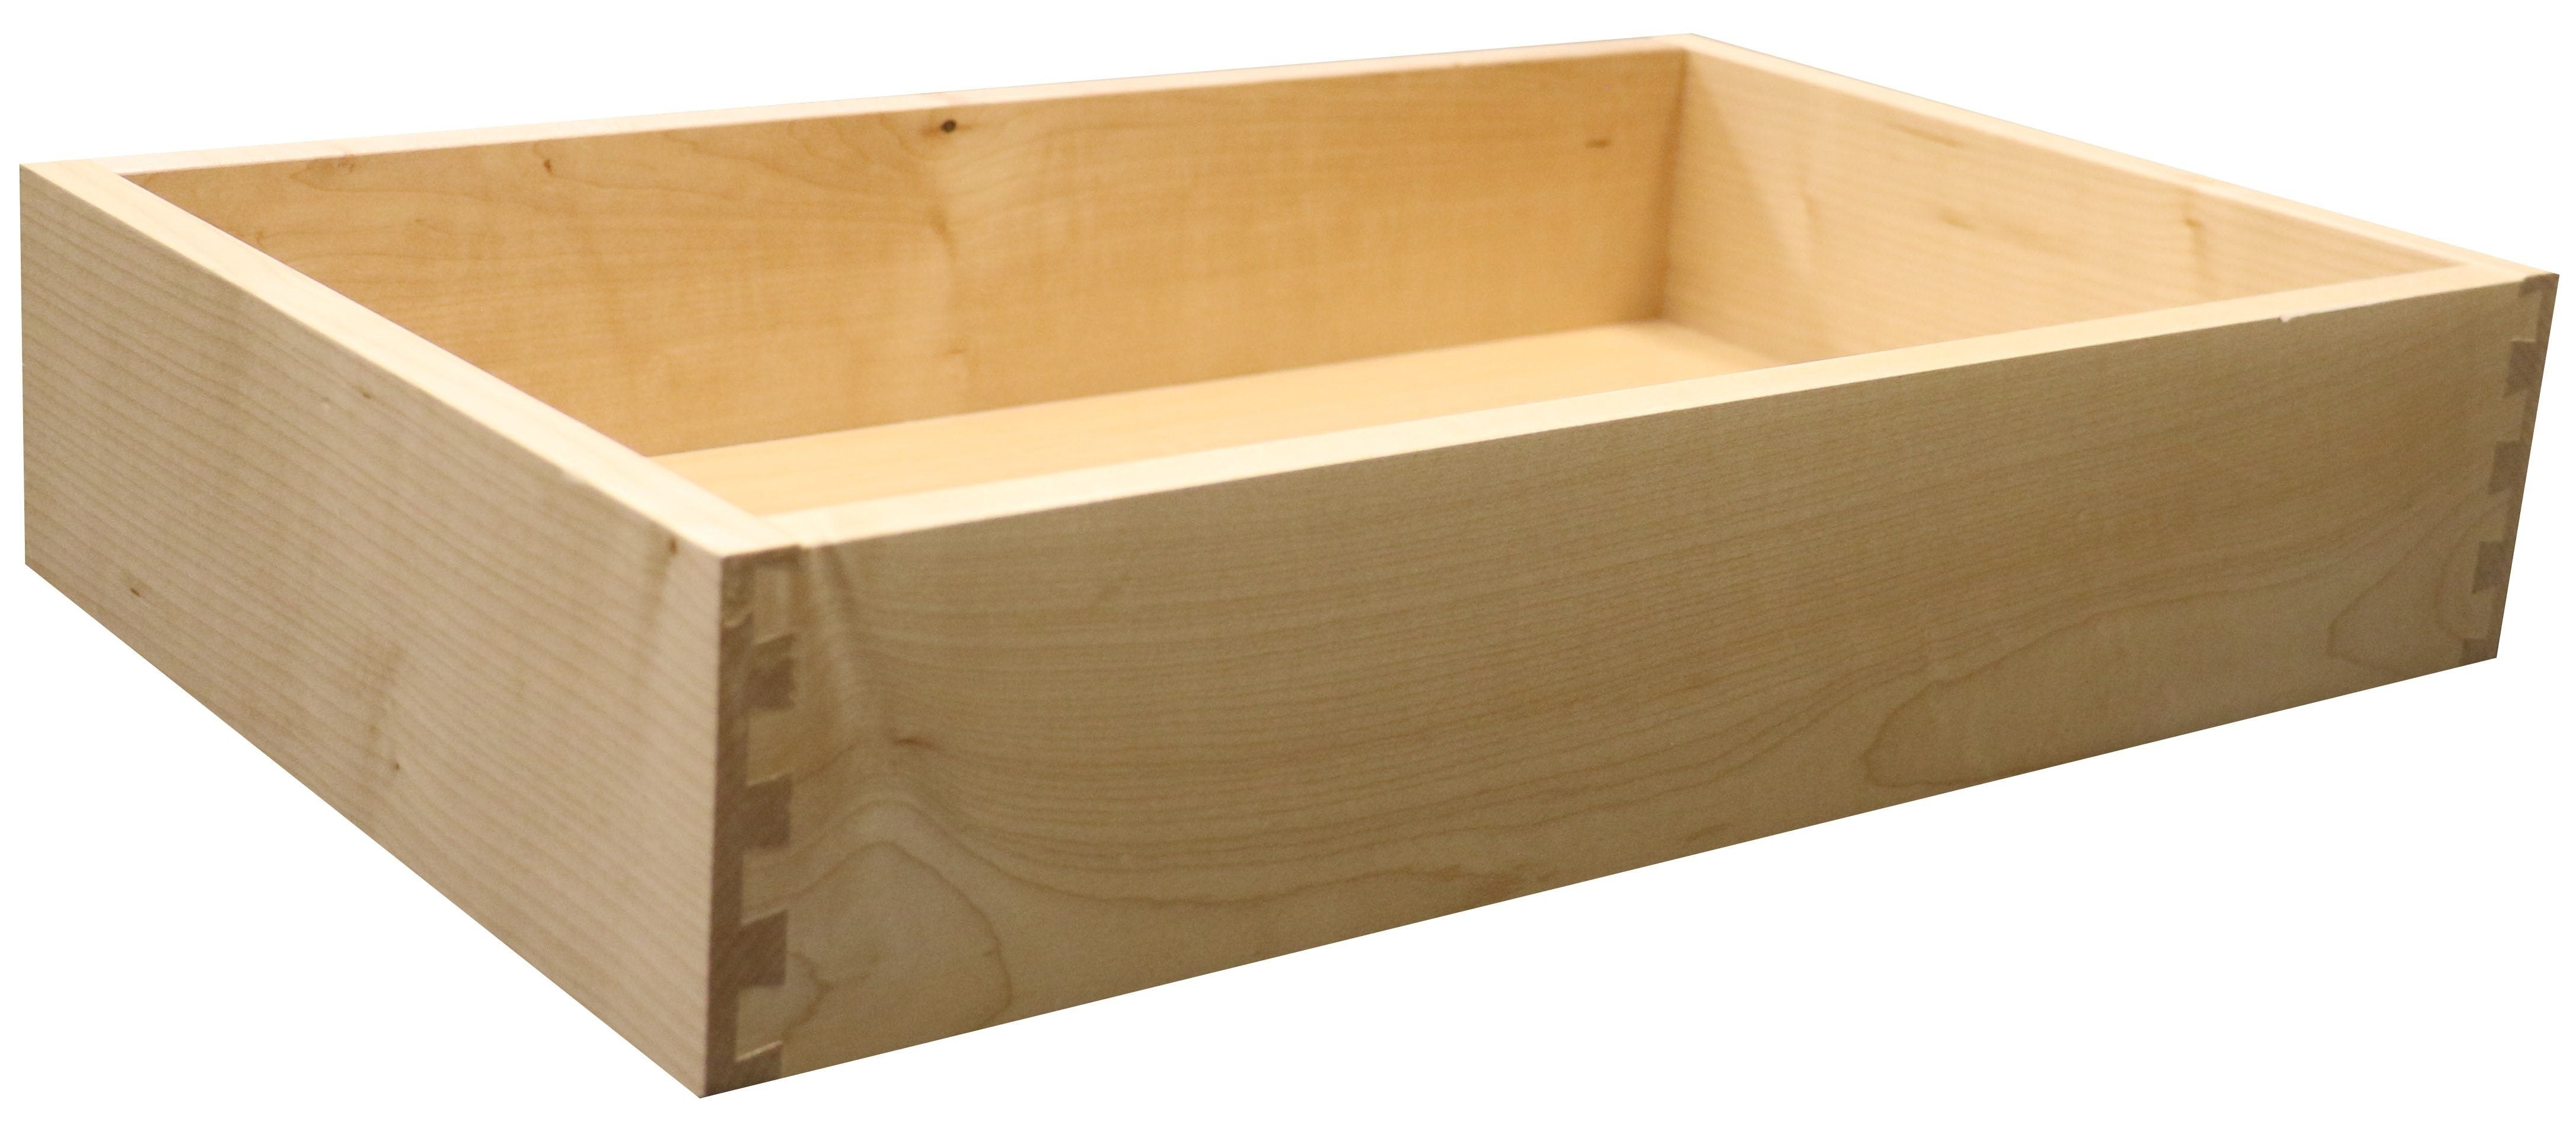 REPLACEMENT CABINET DRAWER BOX - 3 1/2 INCH HEIGHT